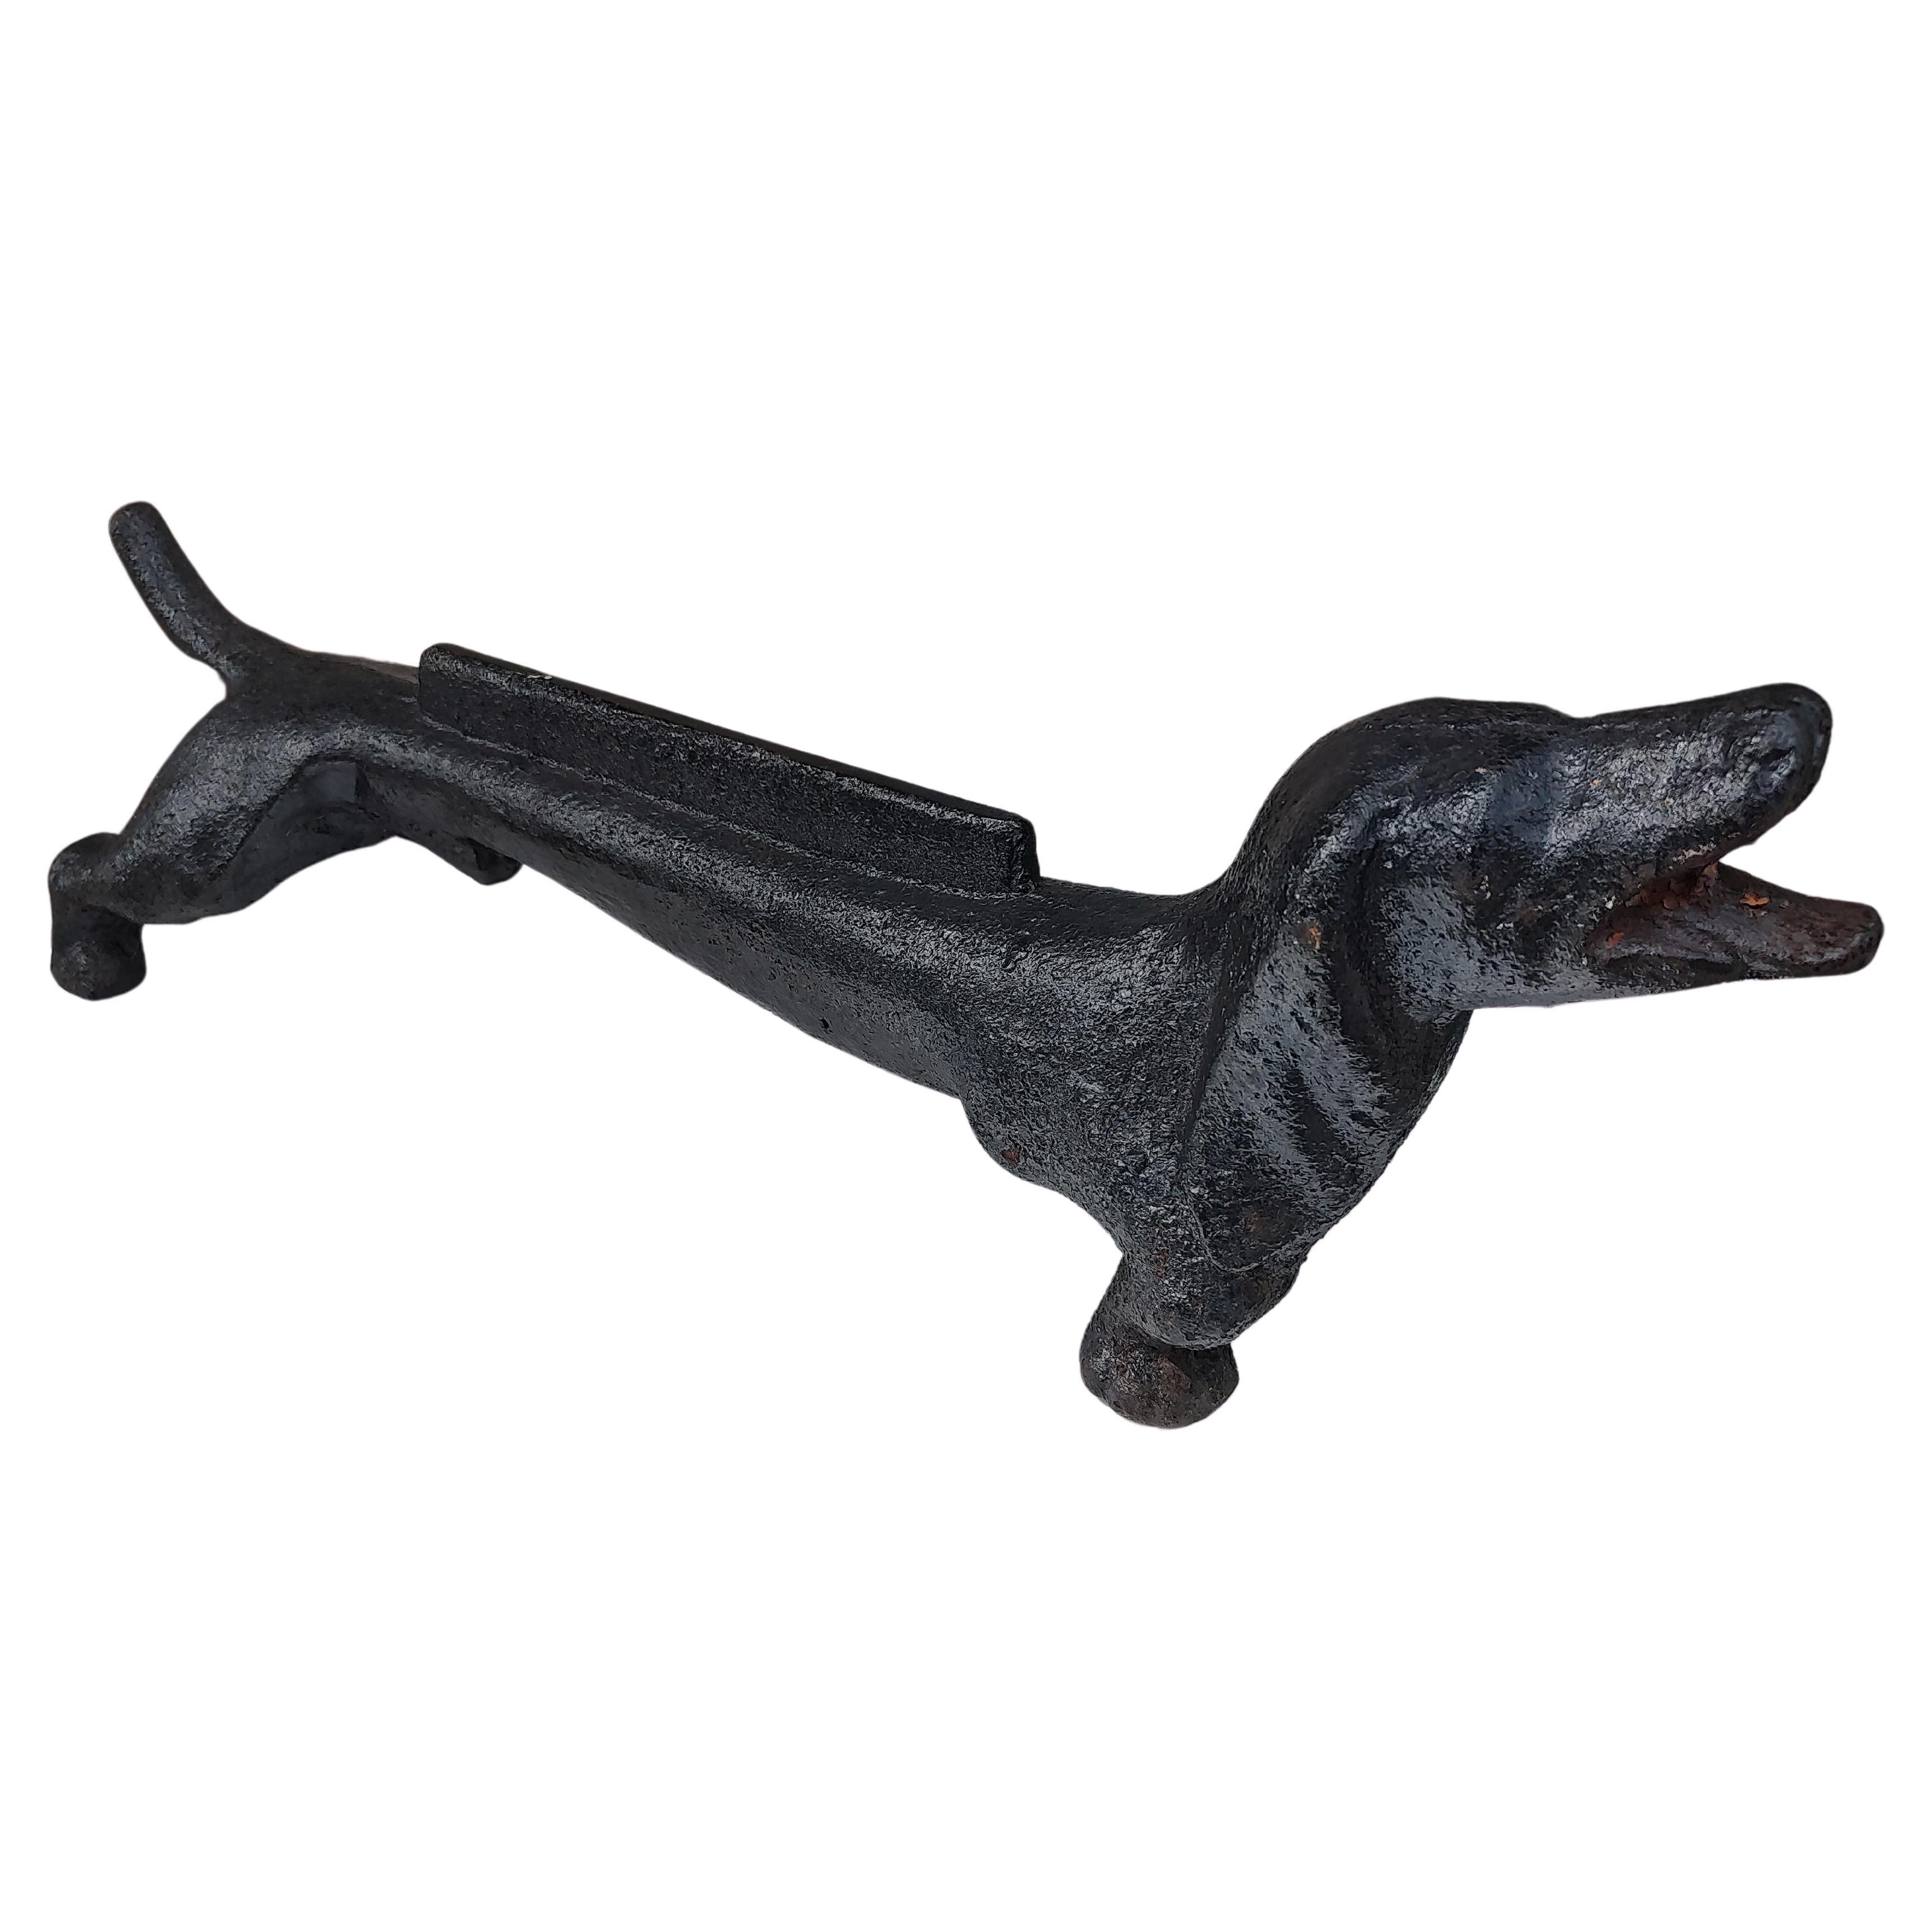 Fabulous cast iron dachshund dog boot scraper in black paint. Two available, this one has a straight tail as opposed to the other with a circle tail. Other minor differences. In excellent vintage condition with minimal wear. Can be parcel posted.